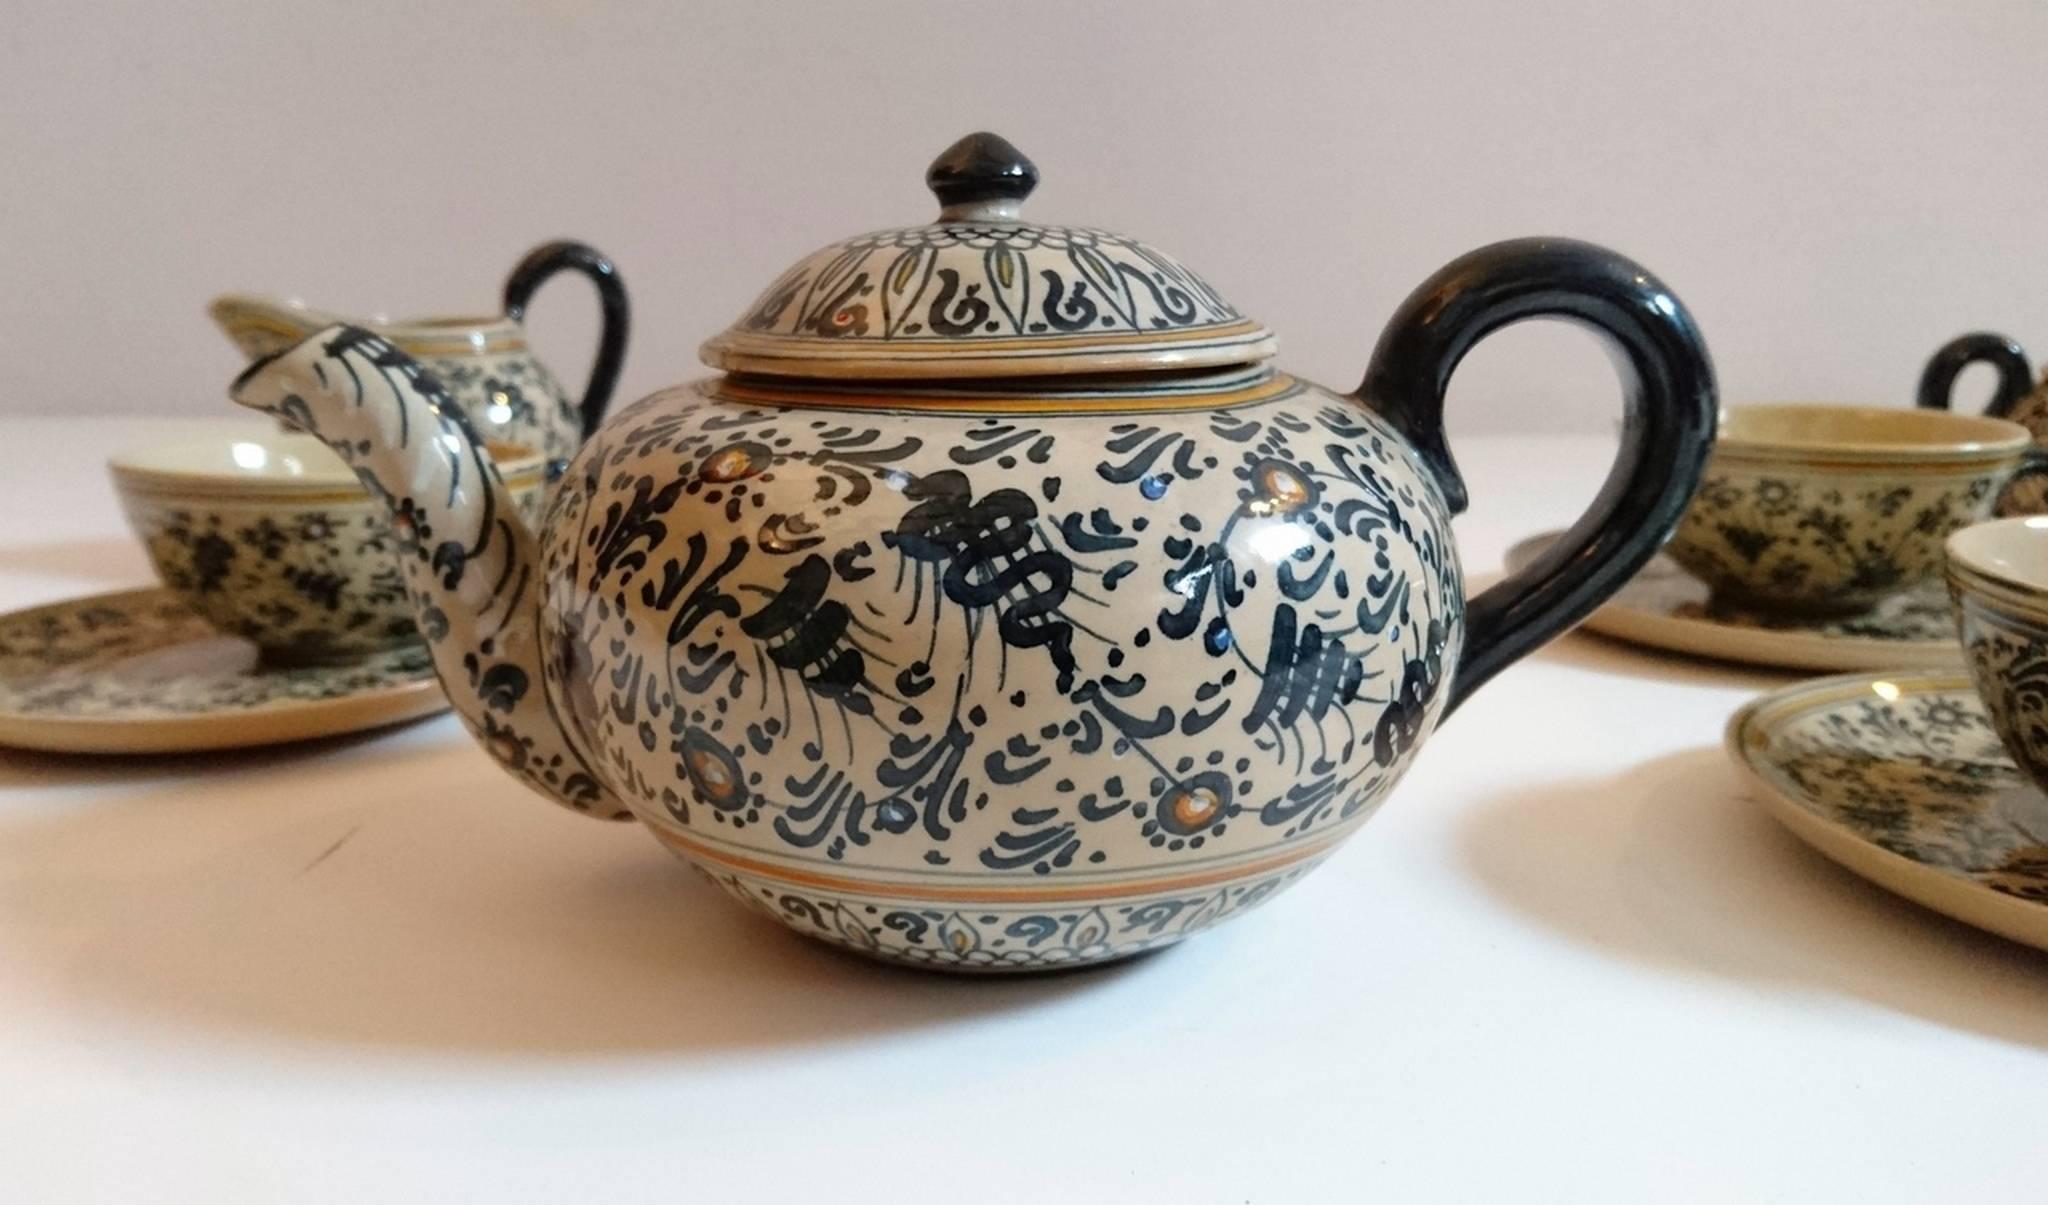 A hand-painted tea set from the 1930s containing one teapot with lid, six cups and saucers, milk jug and sugar bowl with lid in mint condition. Appears like new and unused. All pieces signed and numbered on the bottom.
Measurement teapot: H 11 cm,